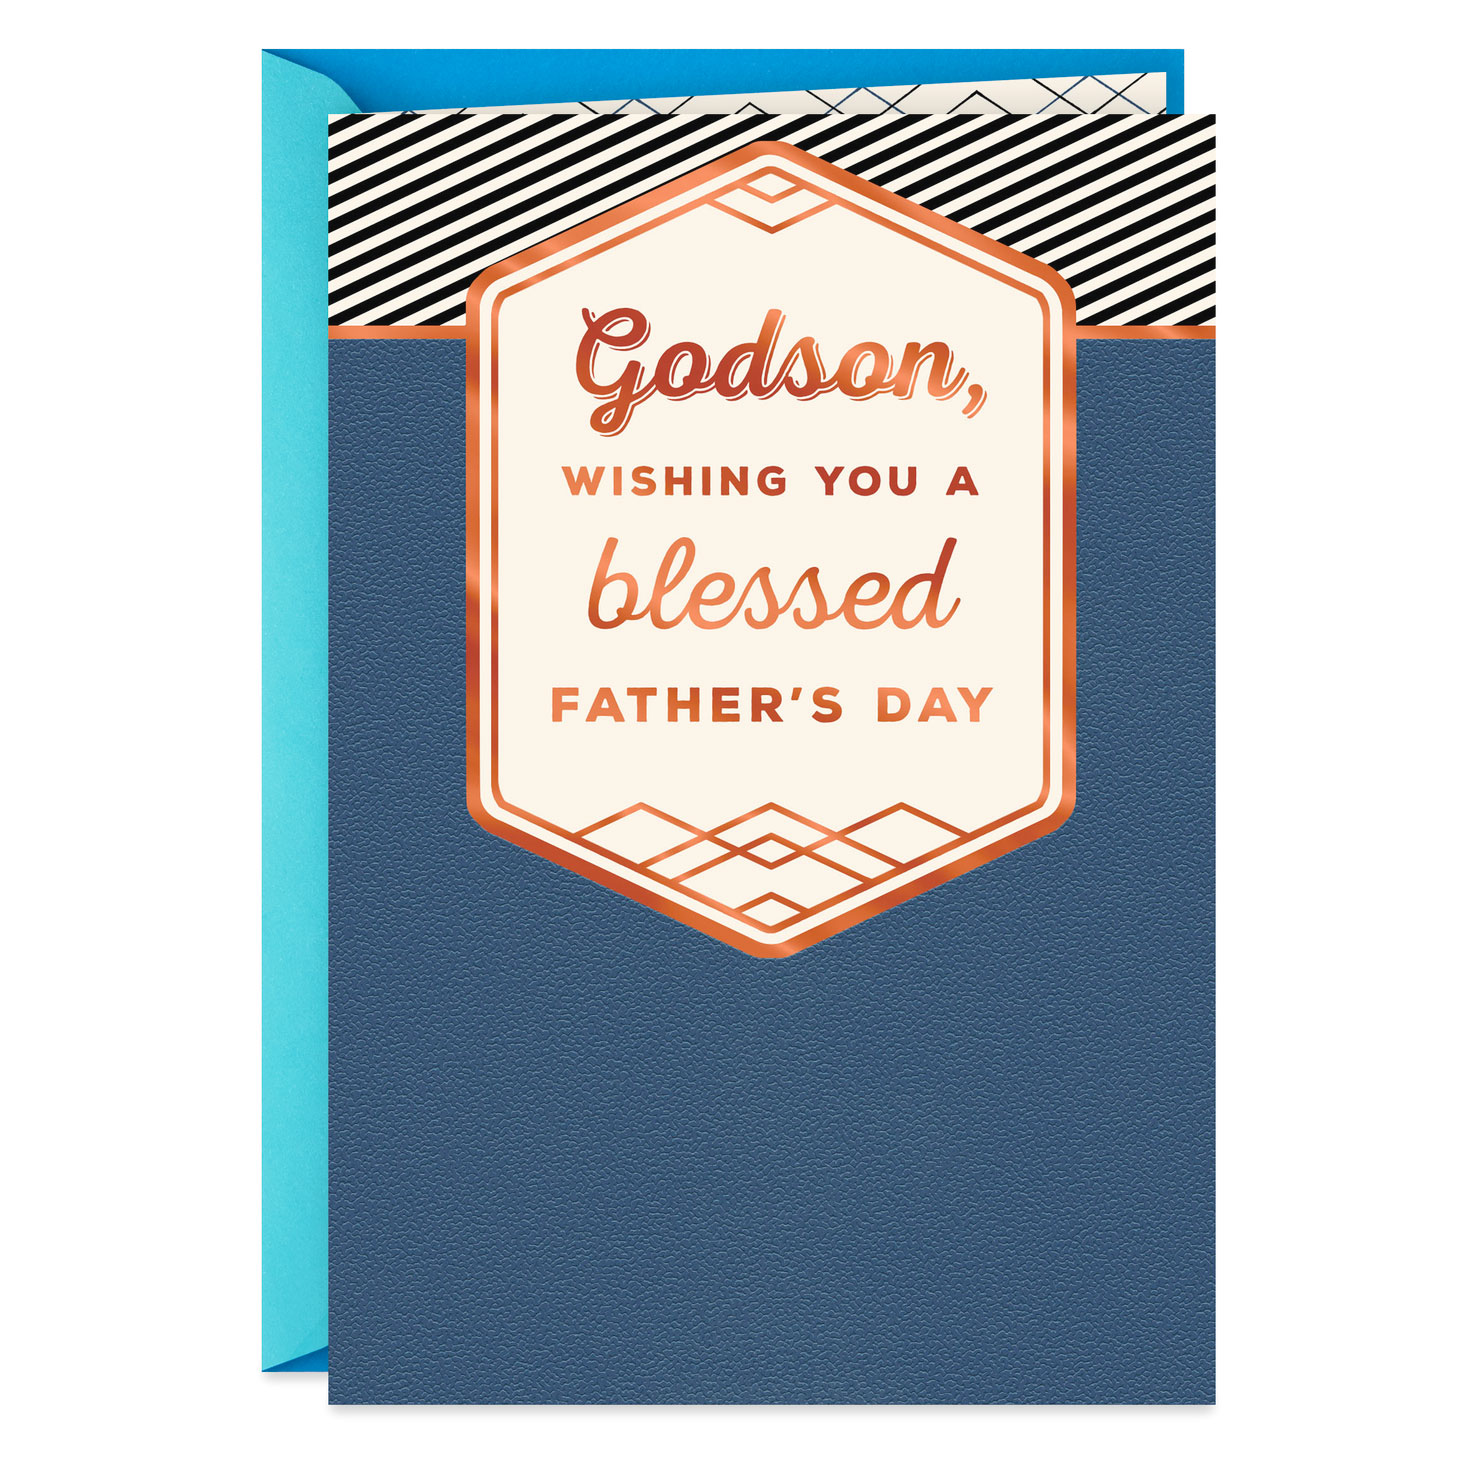 Details about   Hallmark Happy Father's Day Greeting Cards Orange Tones Man of God 